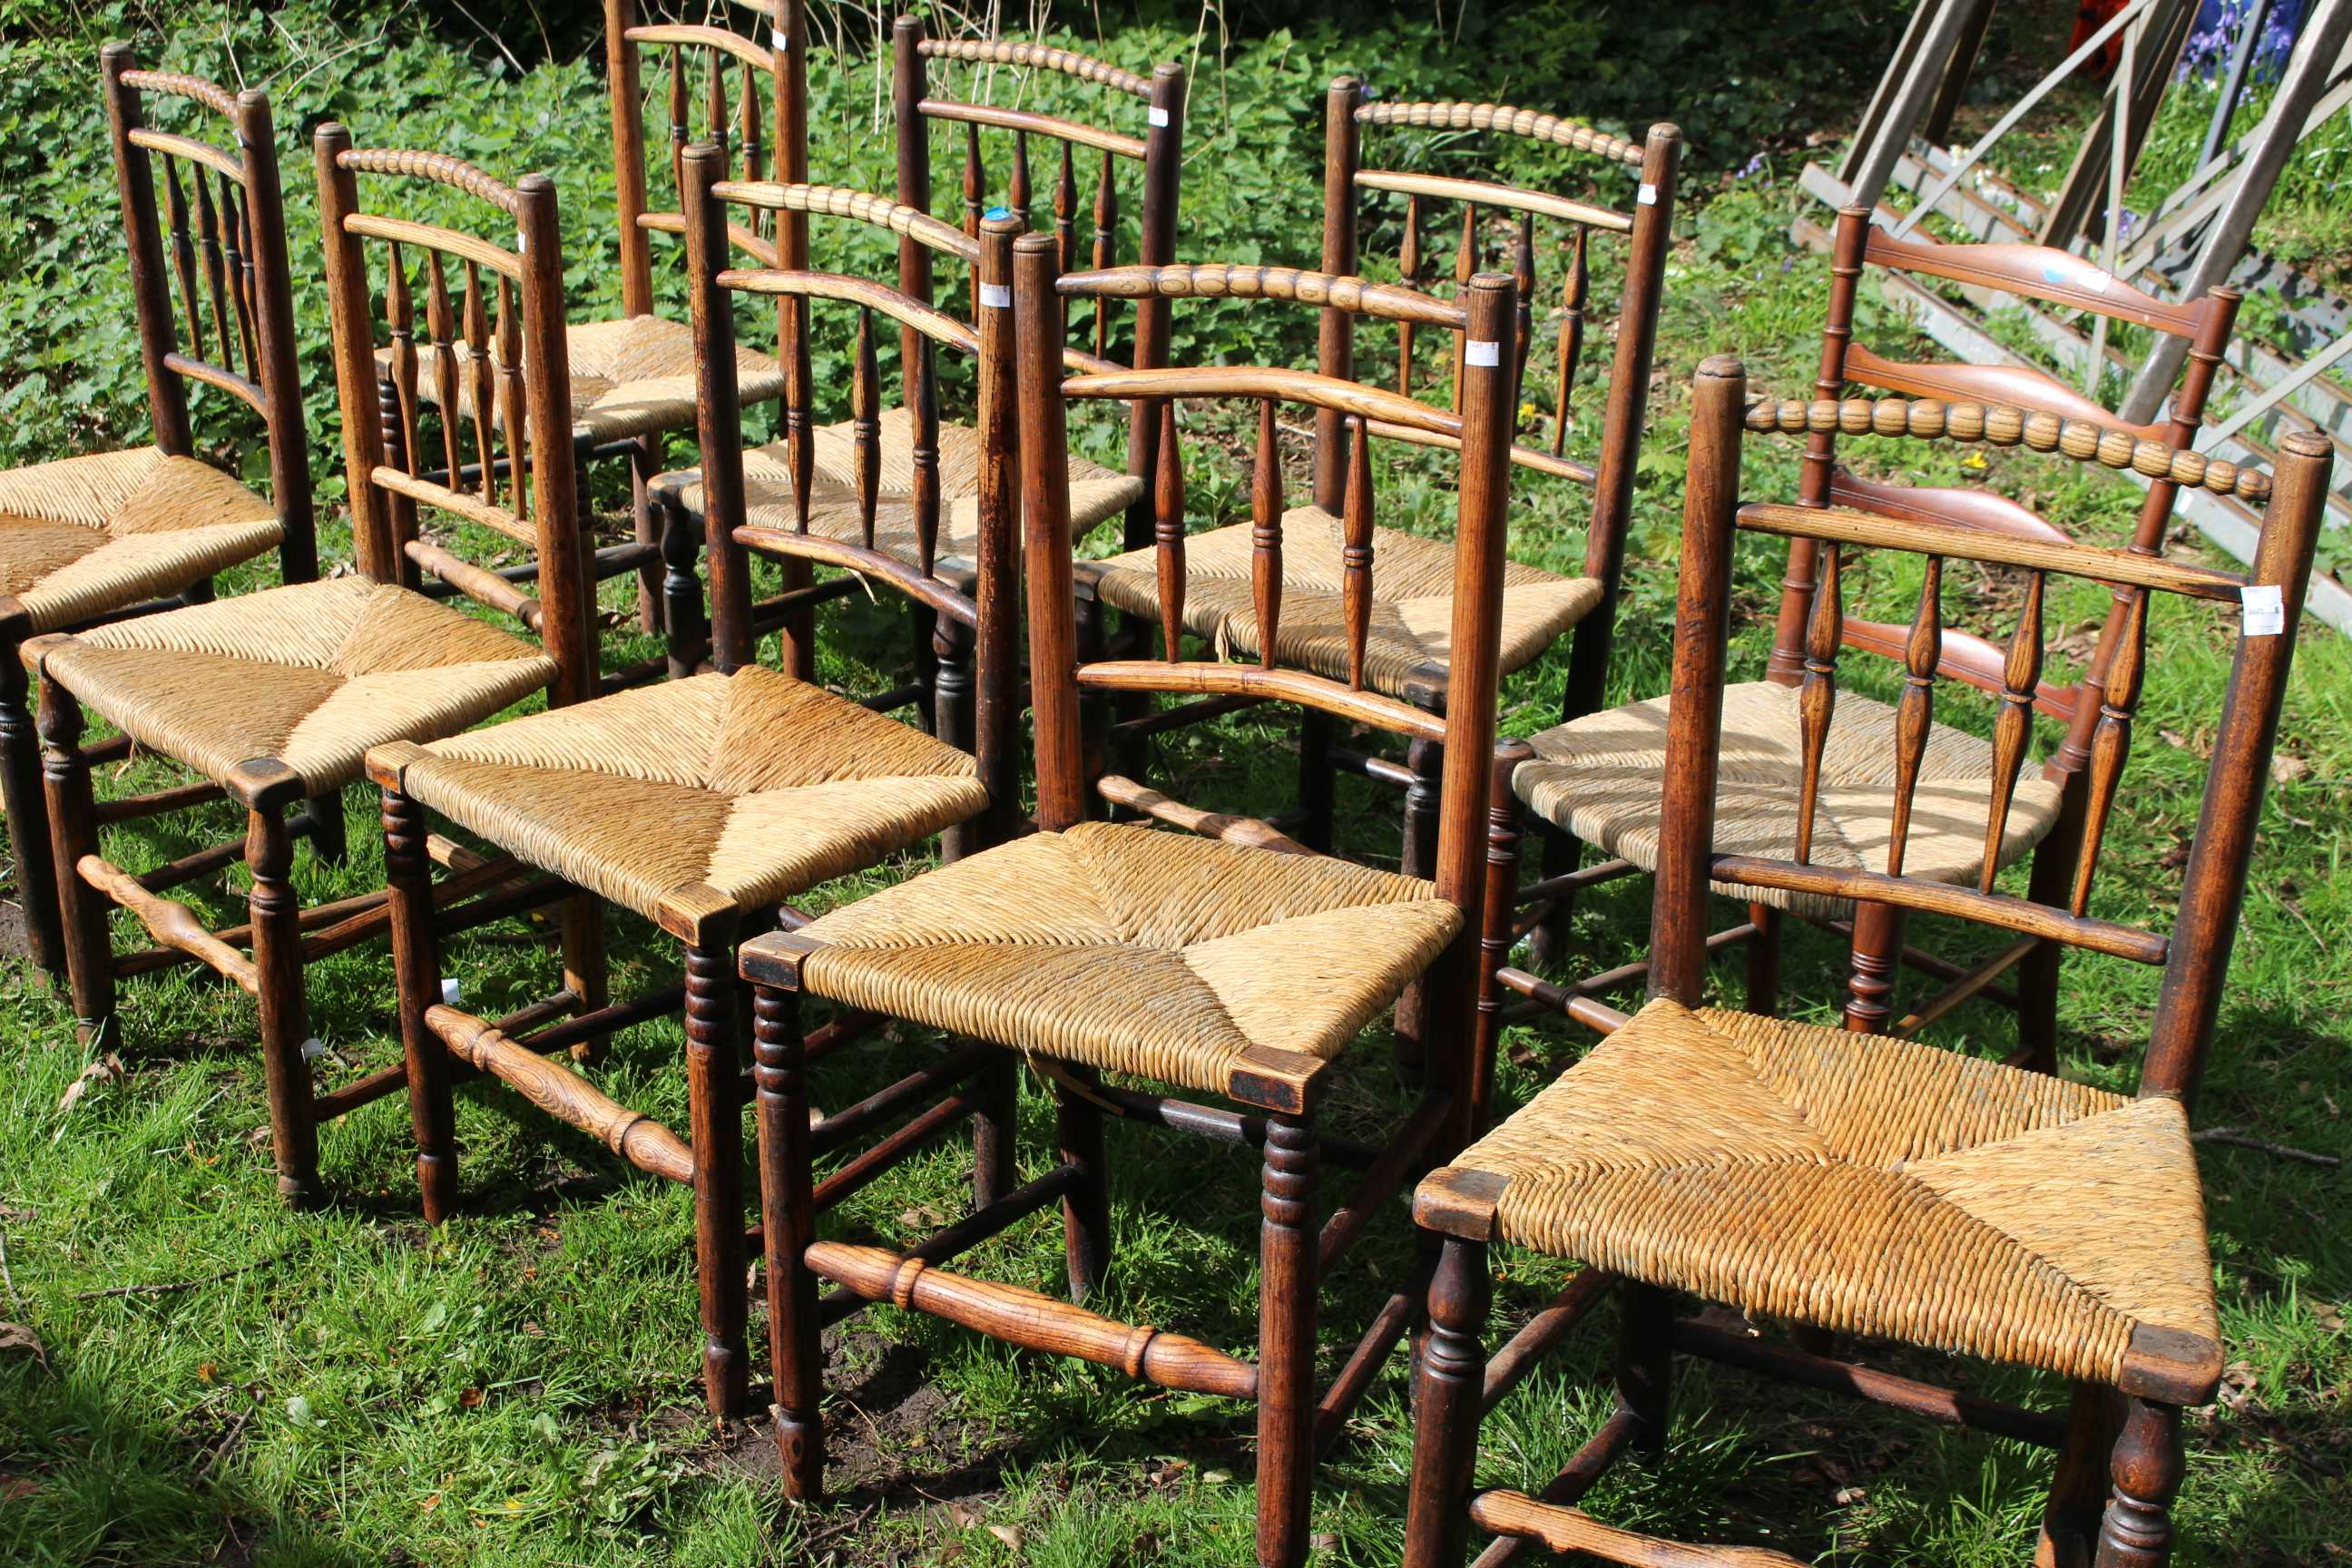 Nine c1900 Rush seated mostly spindle back chairs. (9)